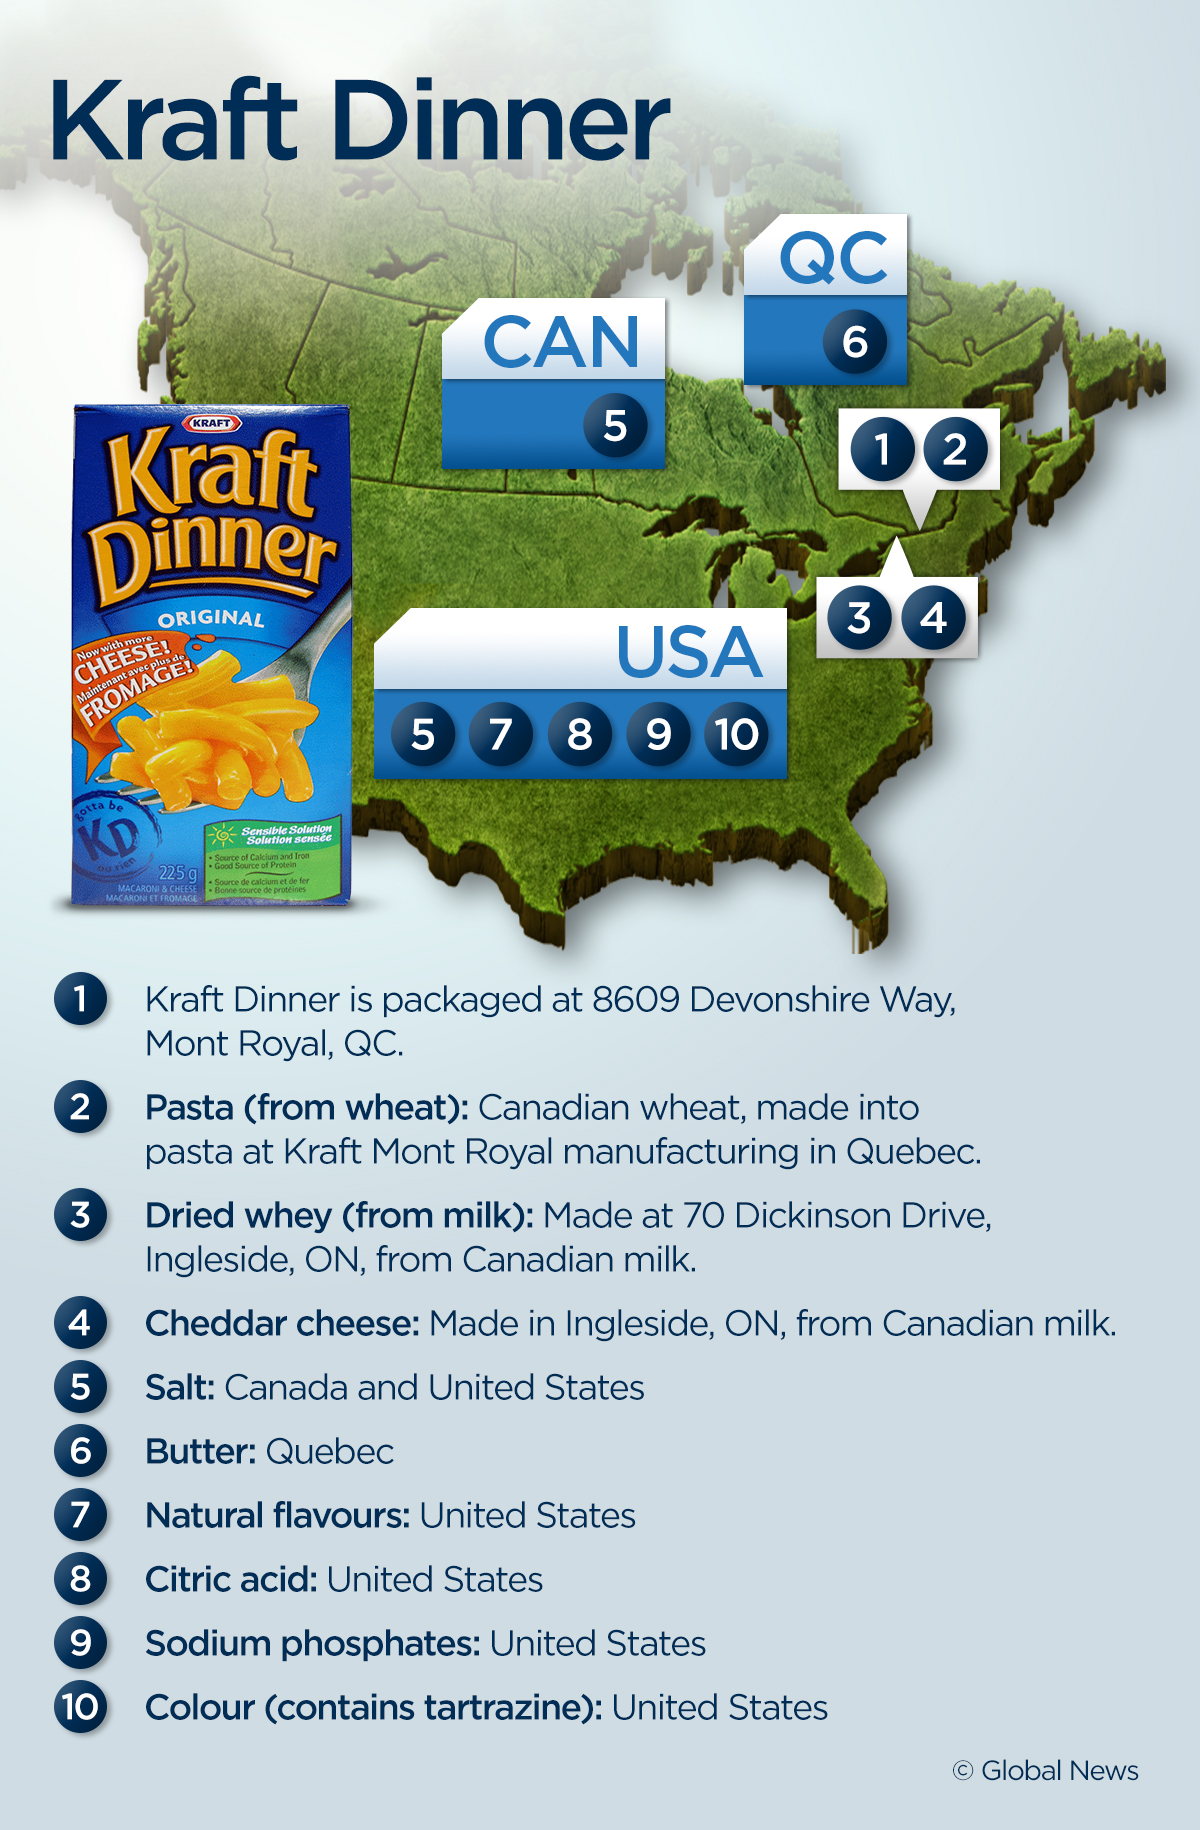 Canadian Factory Works 24/7 to Produce Kraft Dinner